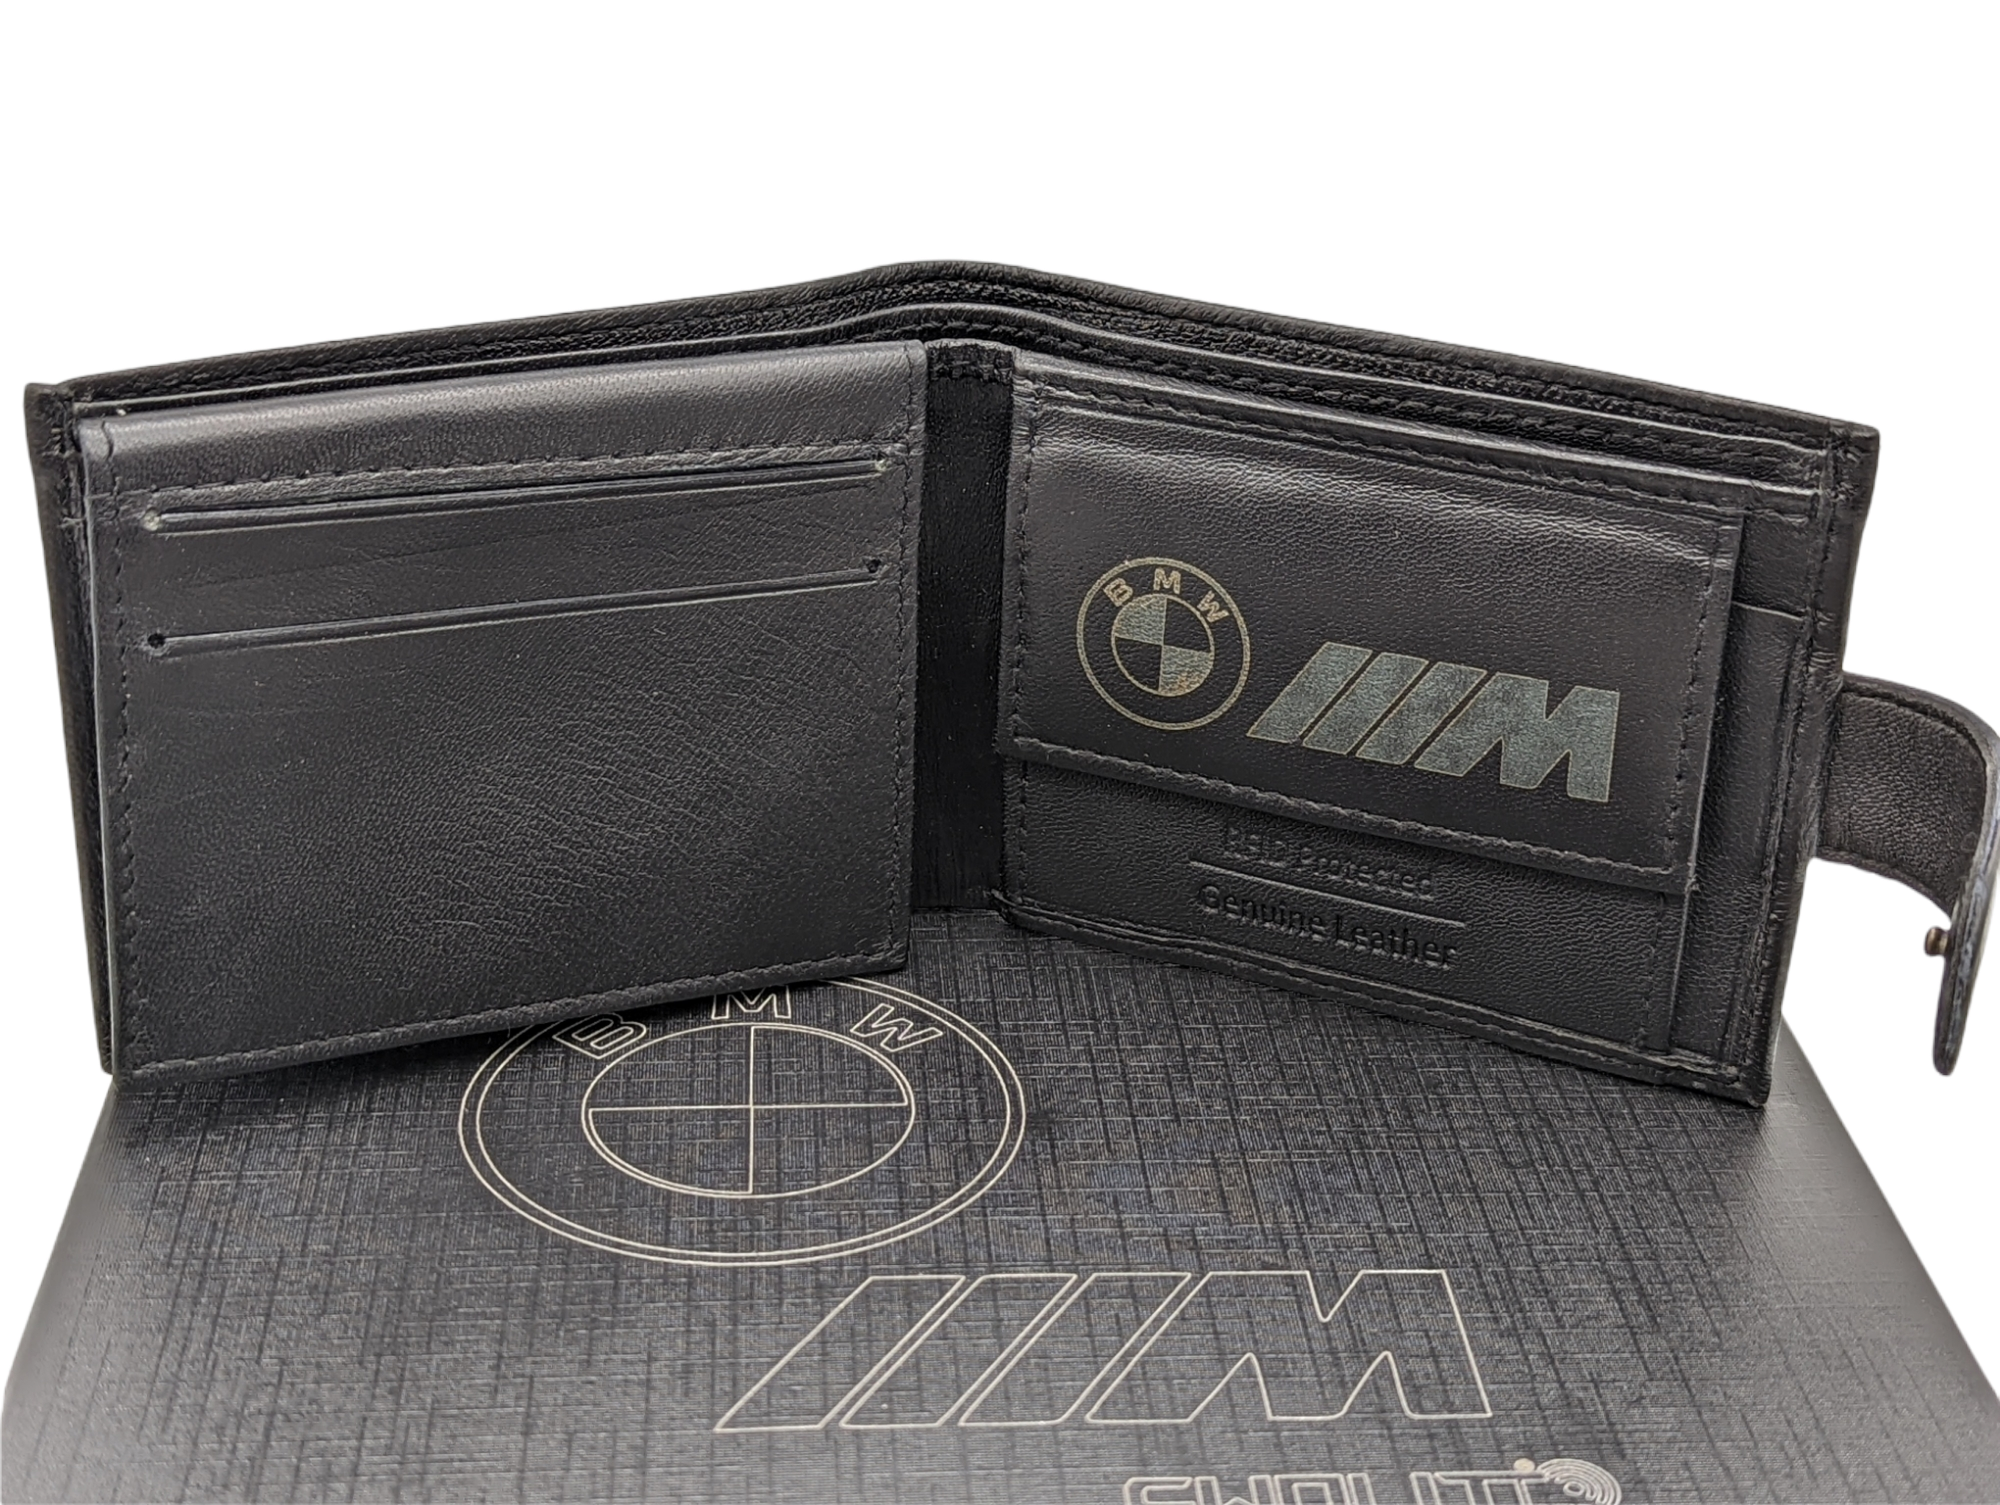 Elite Genuine Leather BMW M Sport Wallet, Key Fob, Pen Boxed Gift Set Gift Boxed VERY LOW STOCK